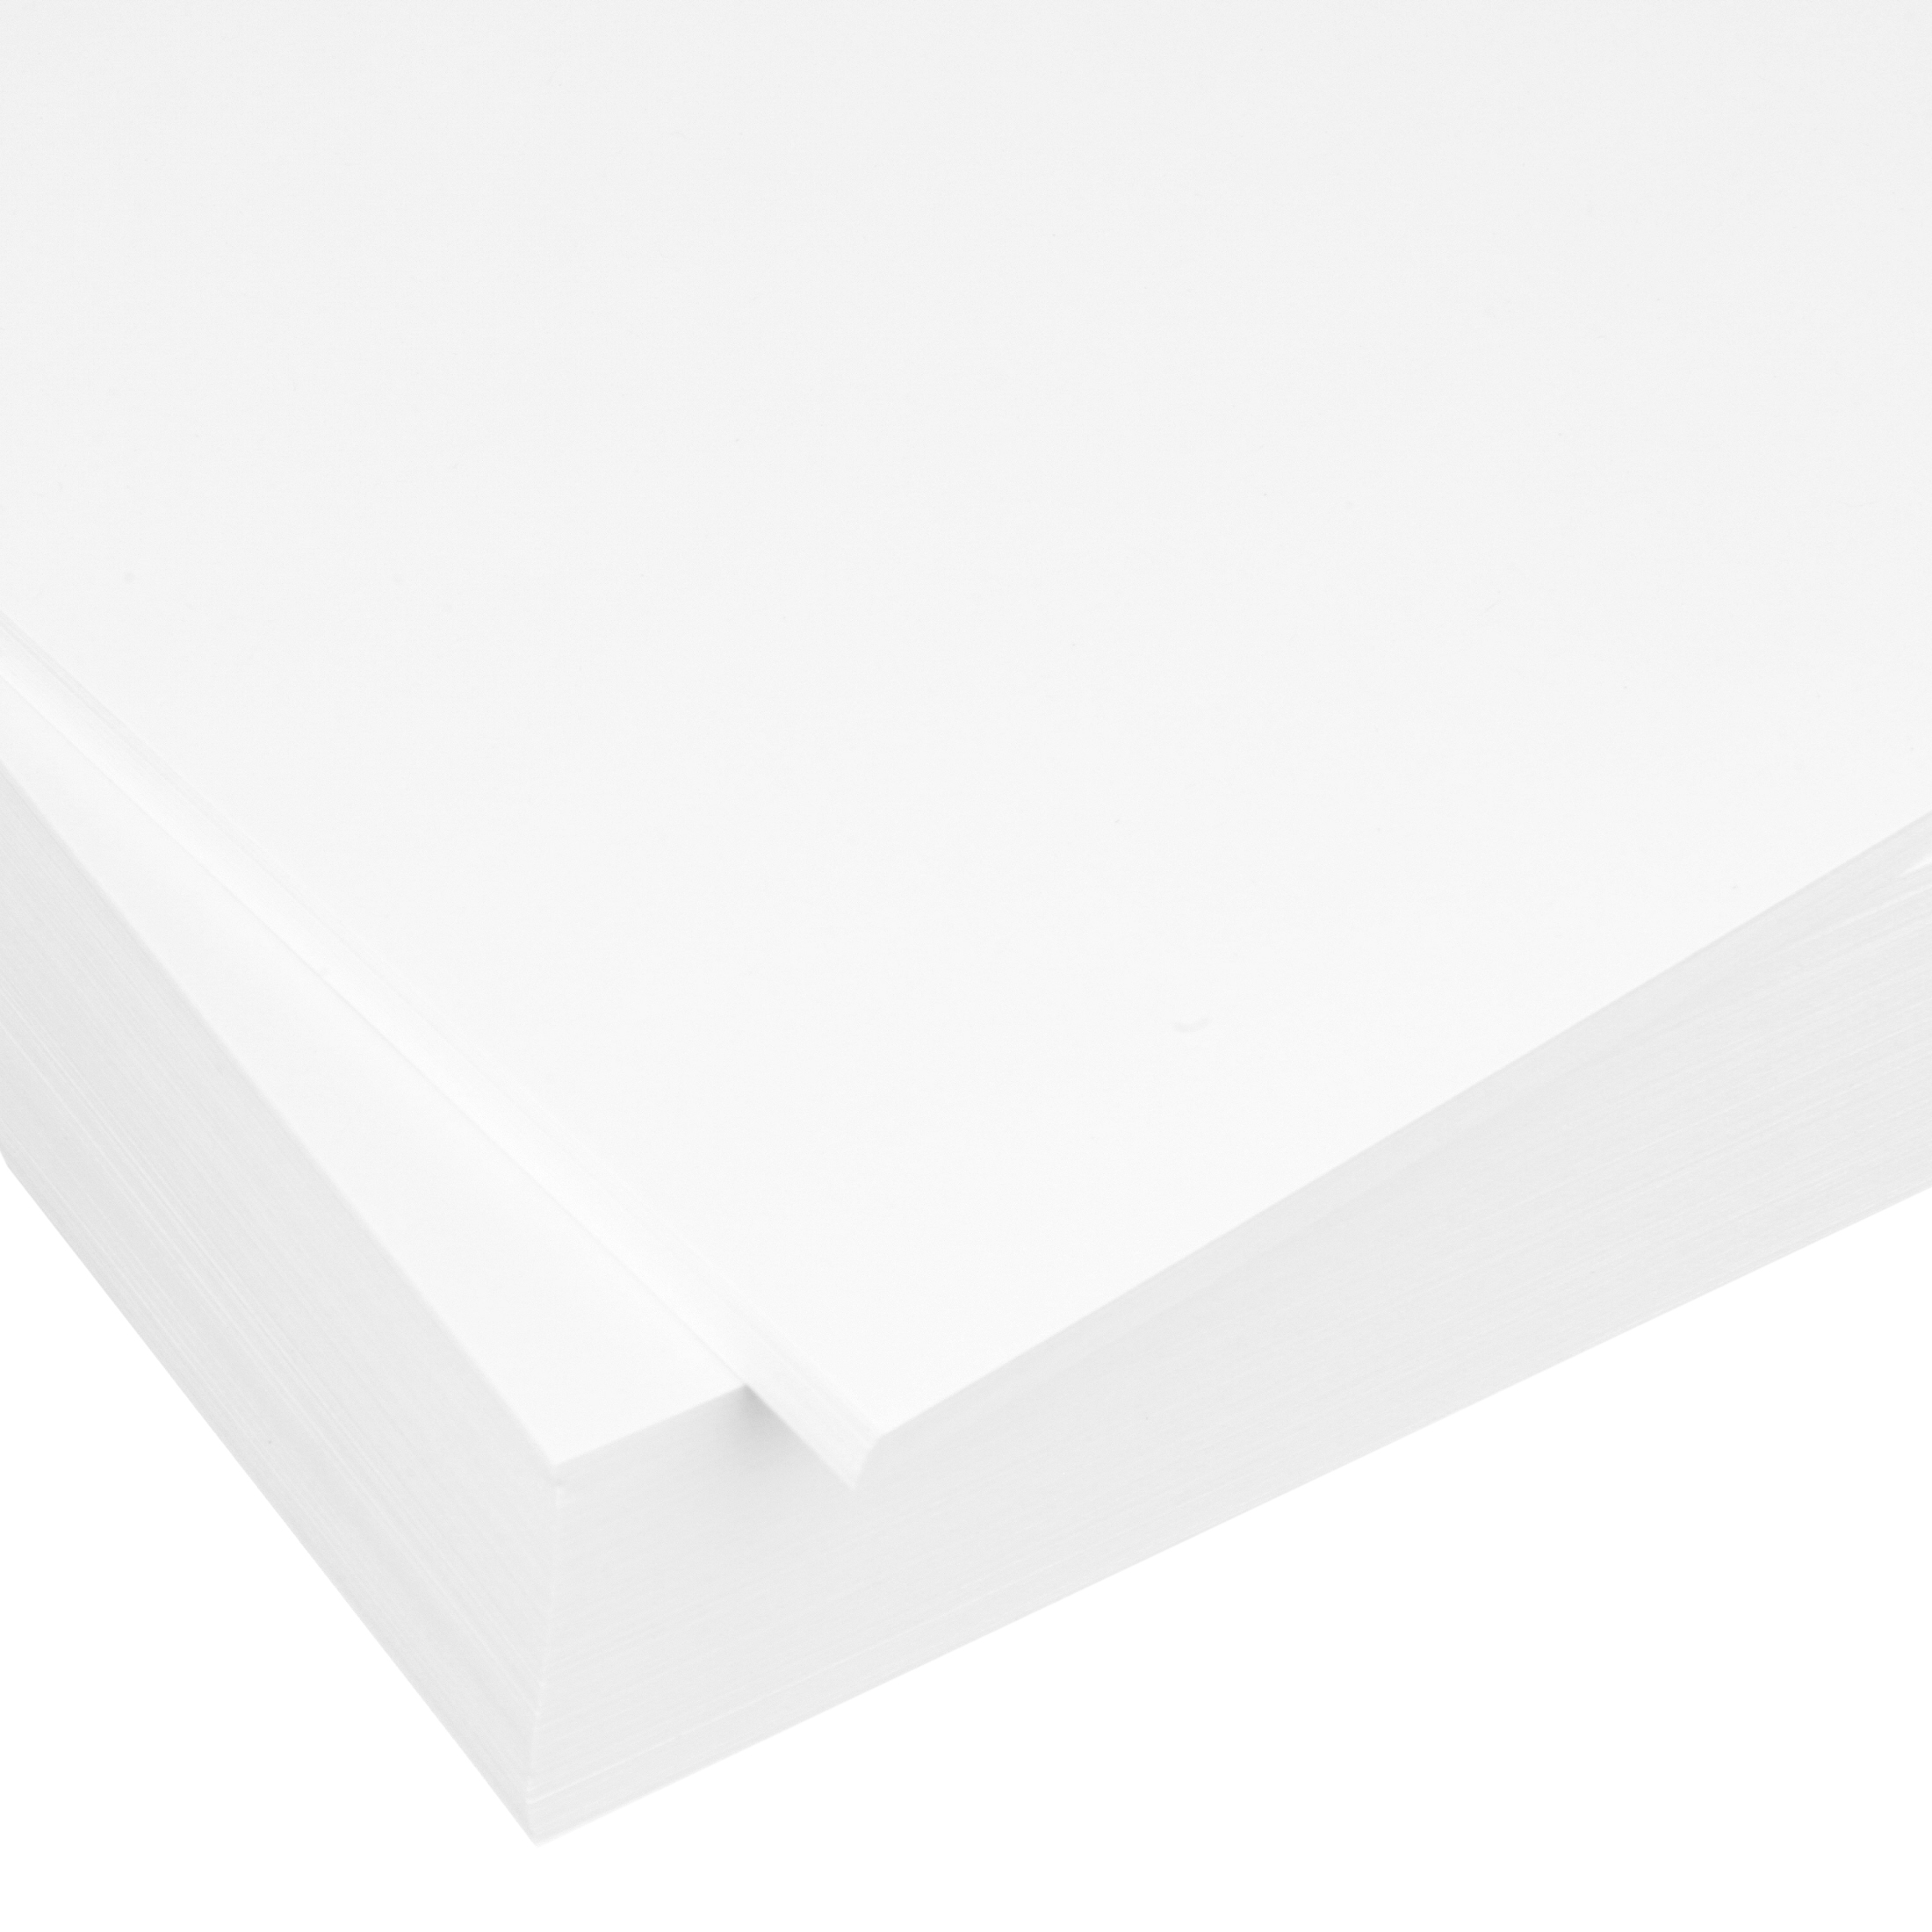 Neenah Exact Index Cardstock, 8.5" x 11", 110 lb./199 Gsm, White, 250 Sheets - image 4 of 7